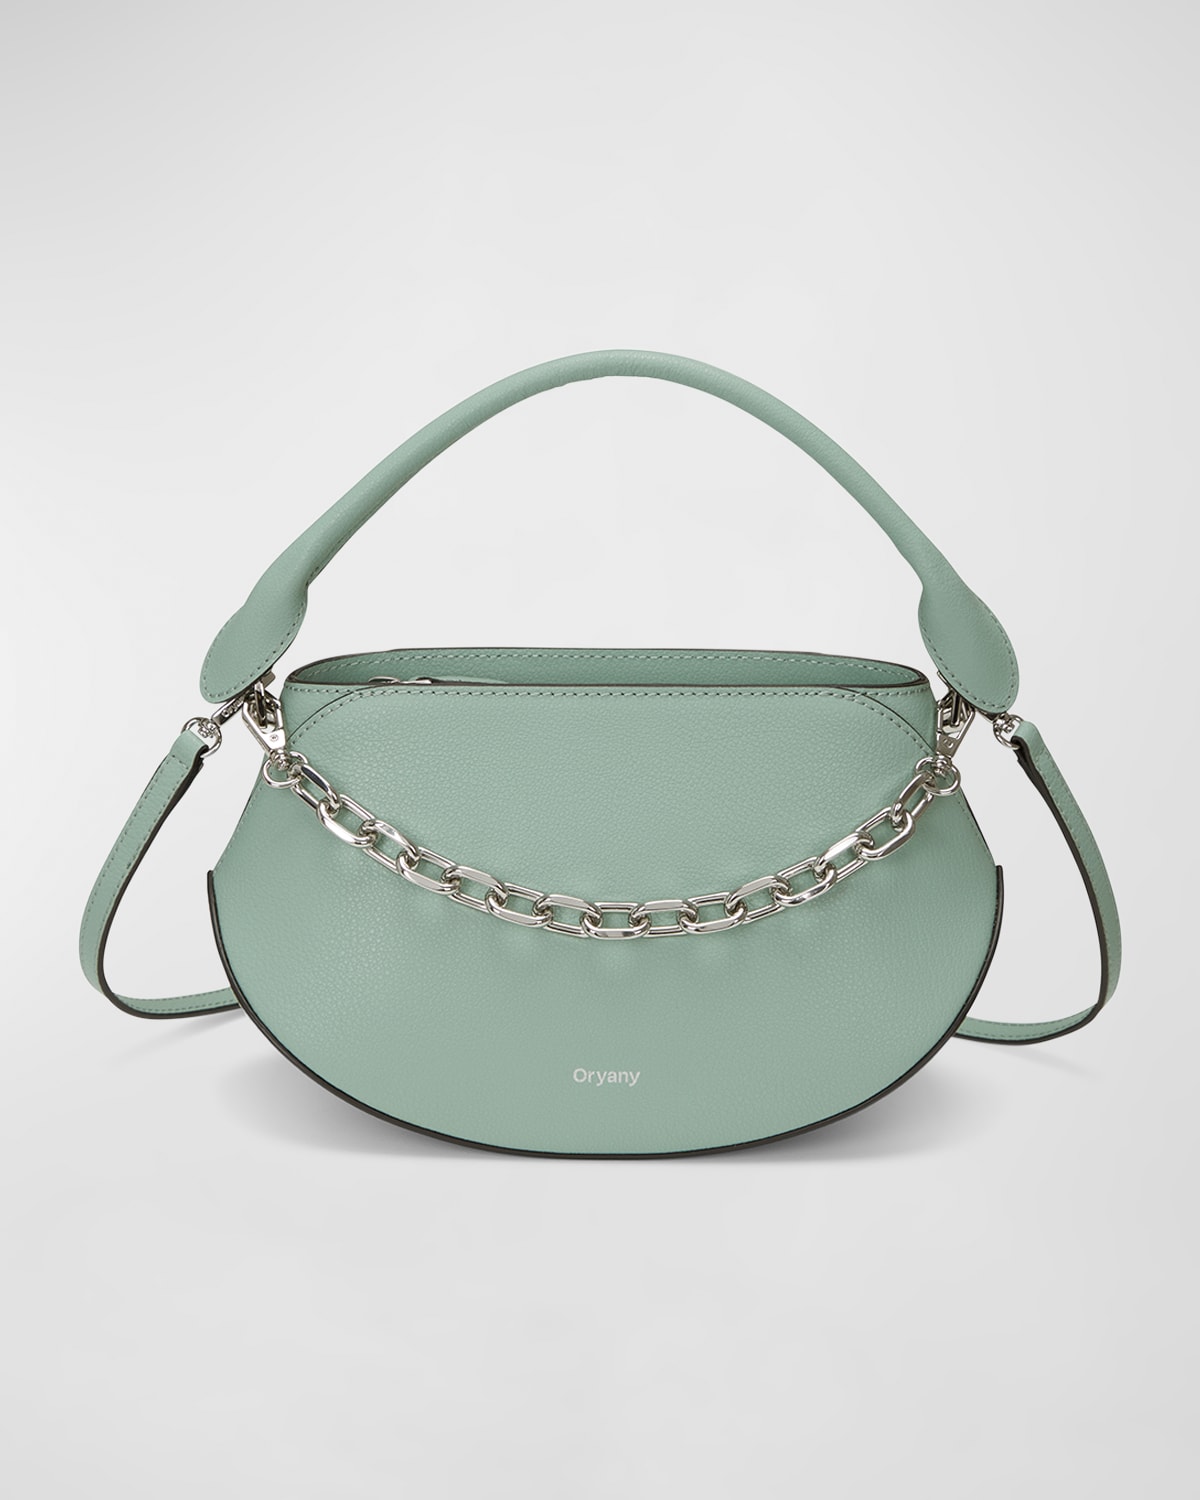 Oryany Flor Mini Leather Top-handle Bag In Dusty Mint